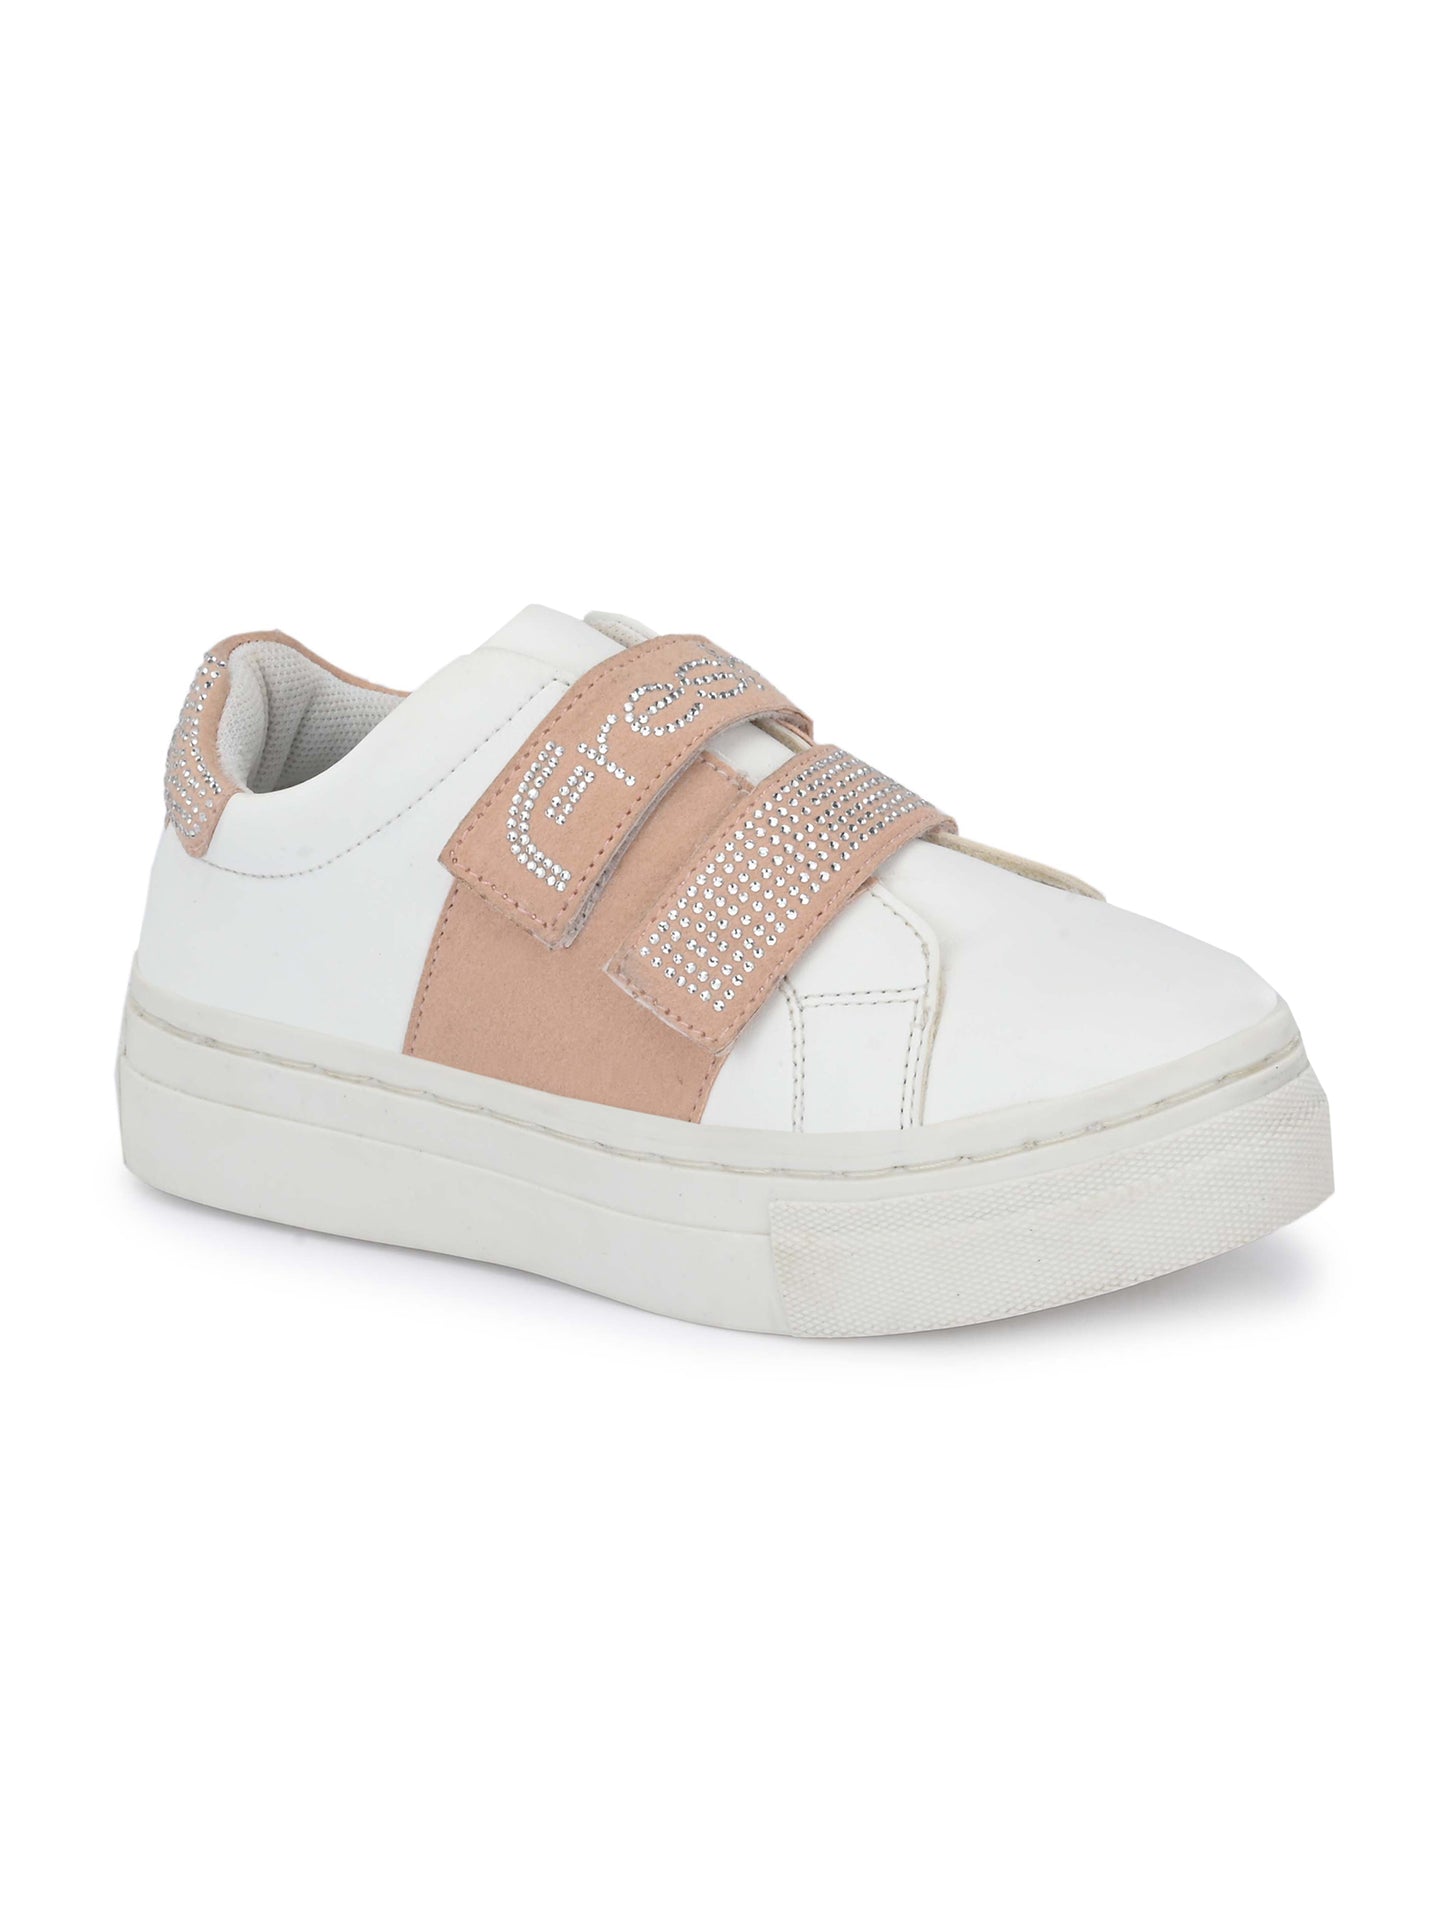 Niko White Pink Shoes for Kids